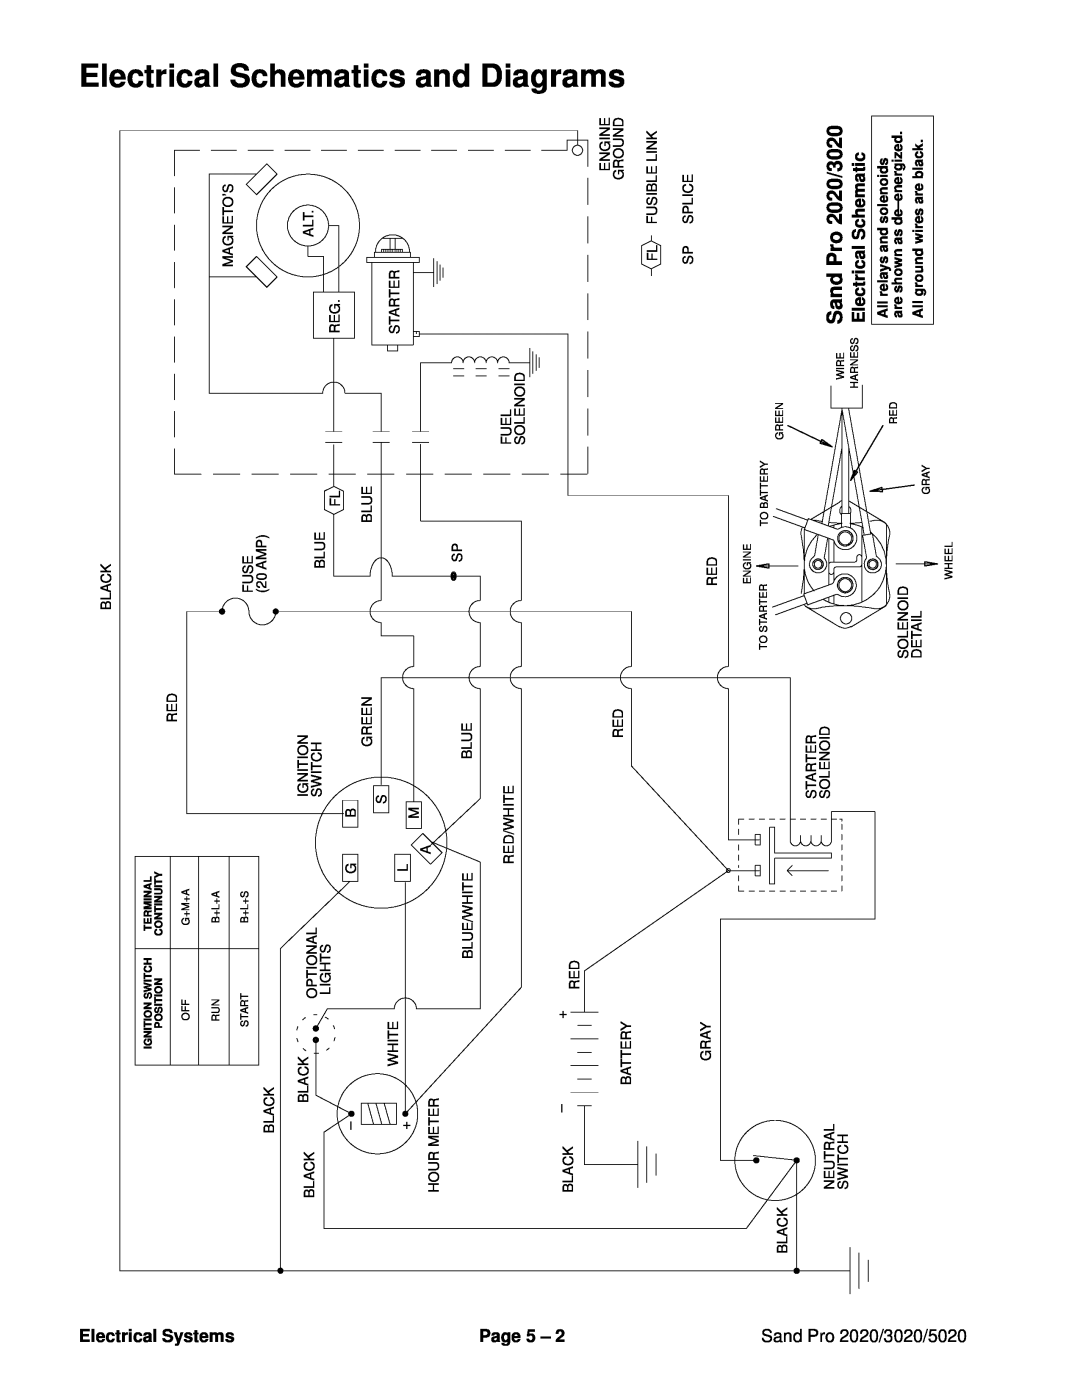 Toro 5020 service manual Electrical Schematics and, Diagrams, Sand Pro 2020/3020, Electrical Systems, Page 5 